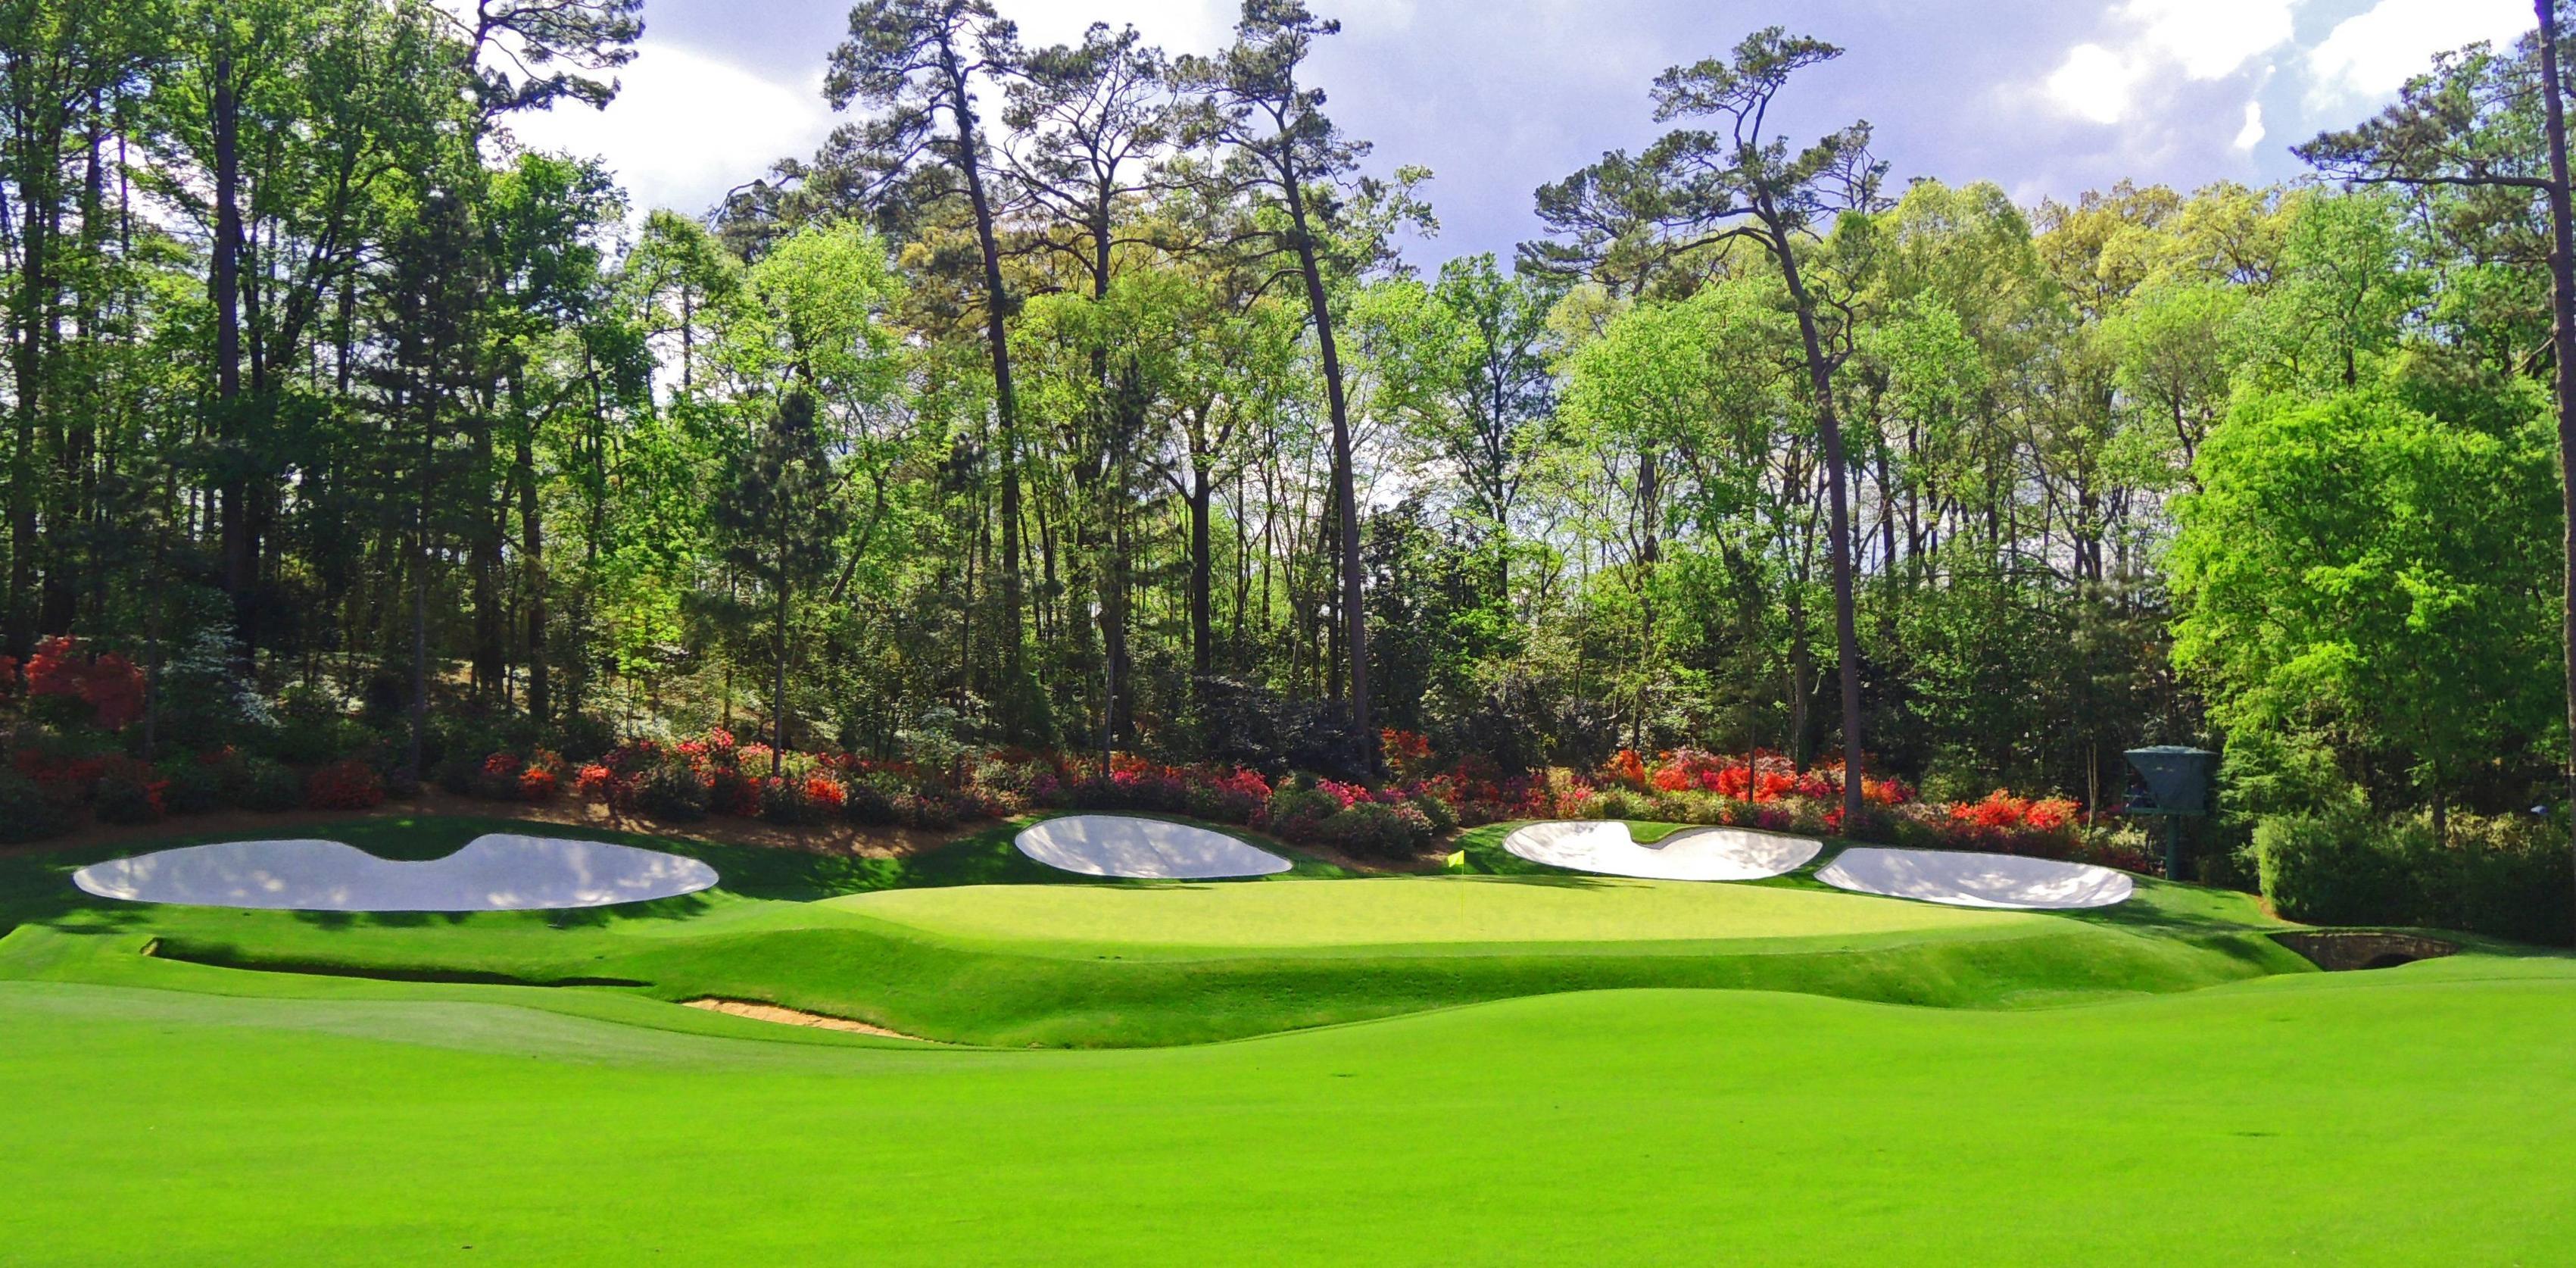 Free 2016 Wallpapers Of Augusta National - Wallpaper Cave